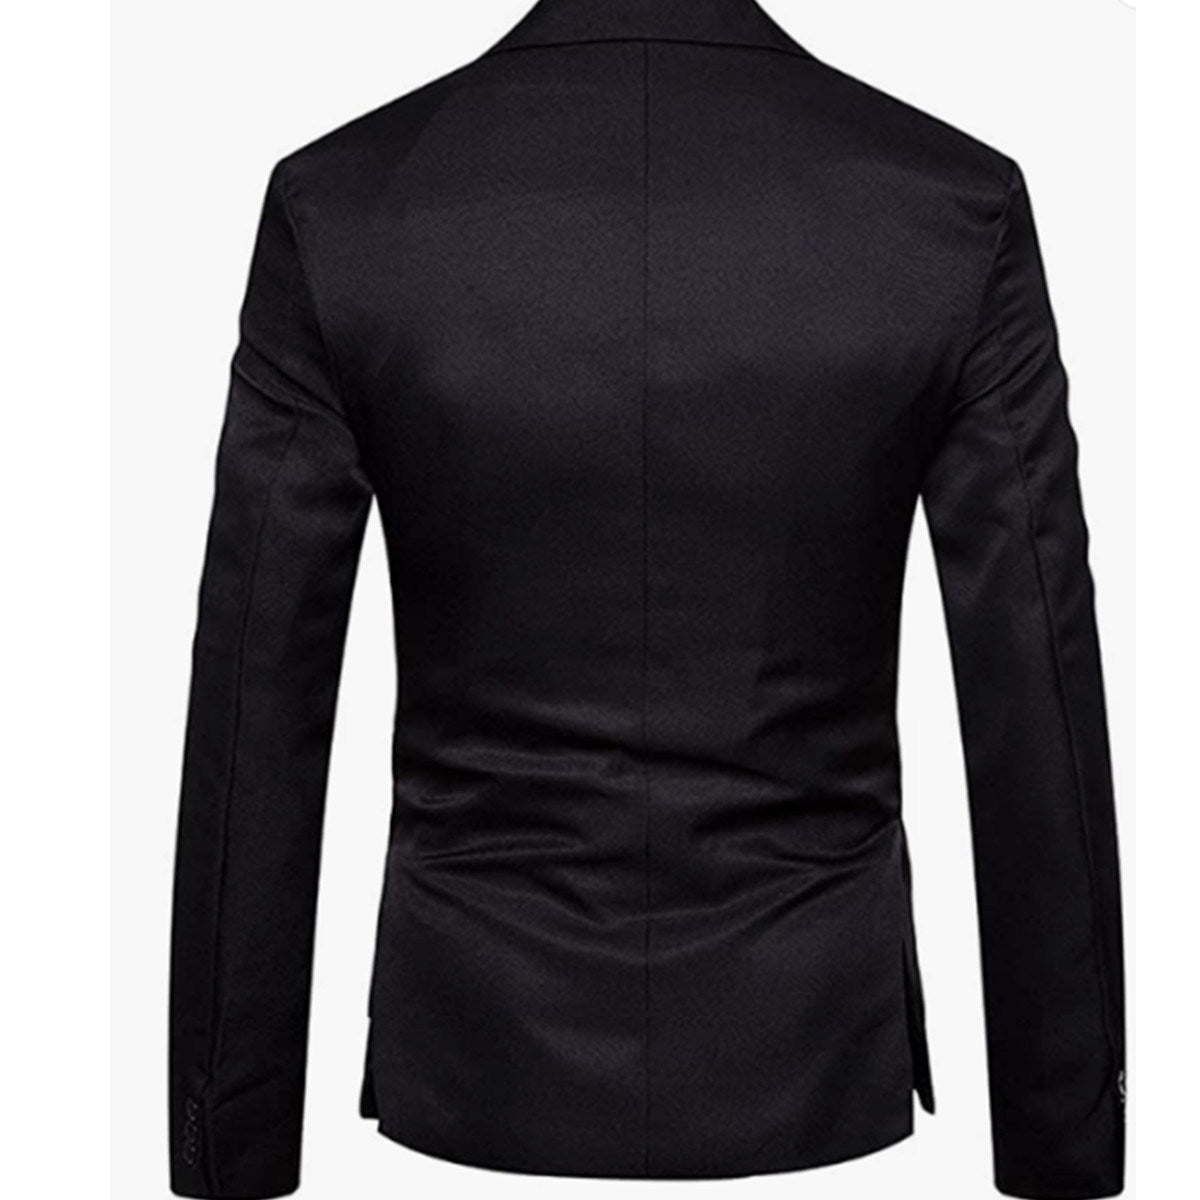 Men's Solid Color Suit Jackets Slim Fit Casual Jackets Suit Collar Single Row One Button Blazers